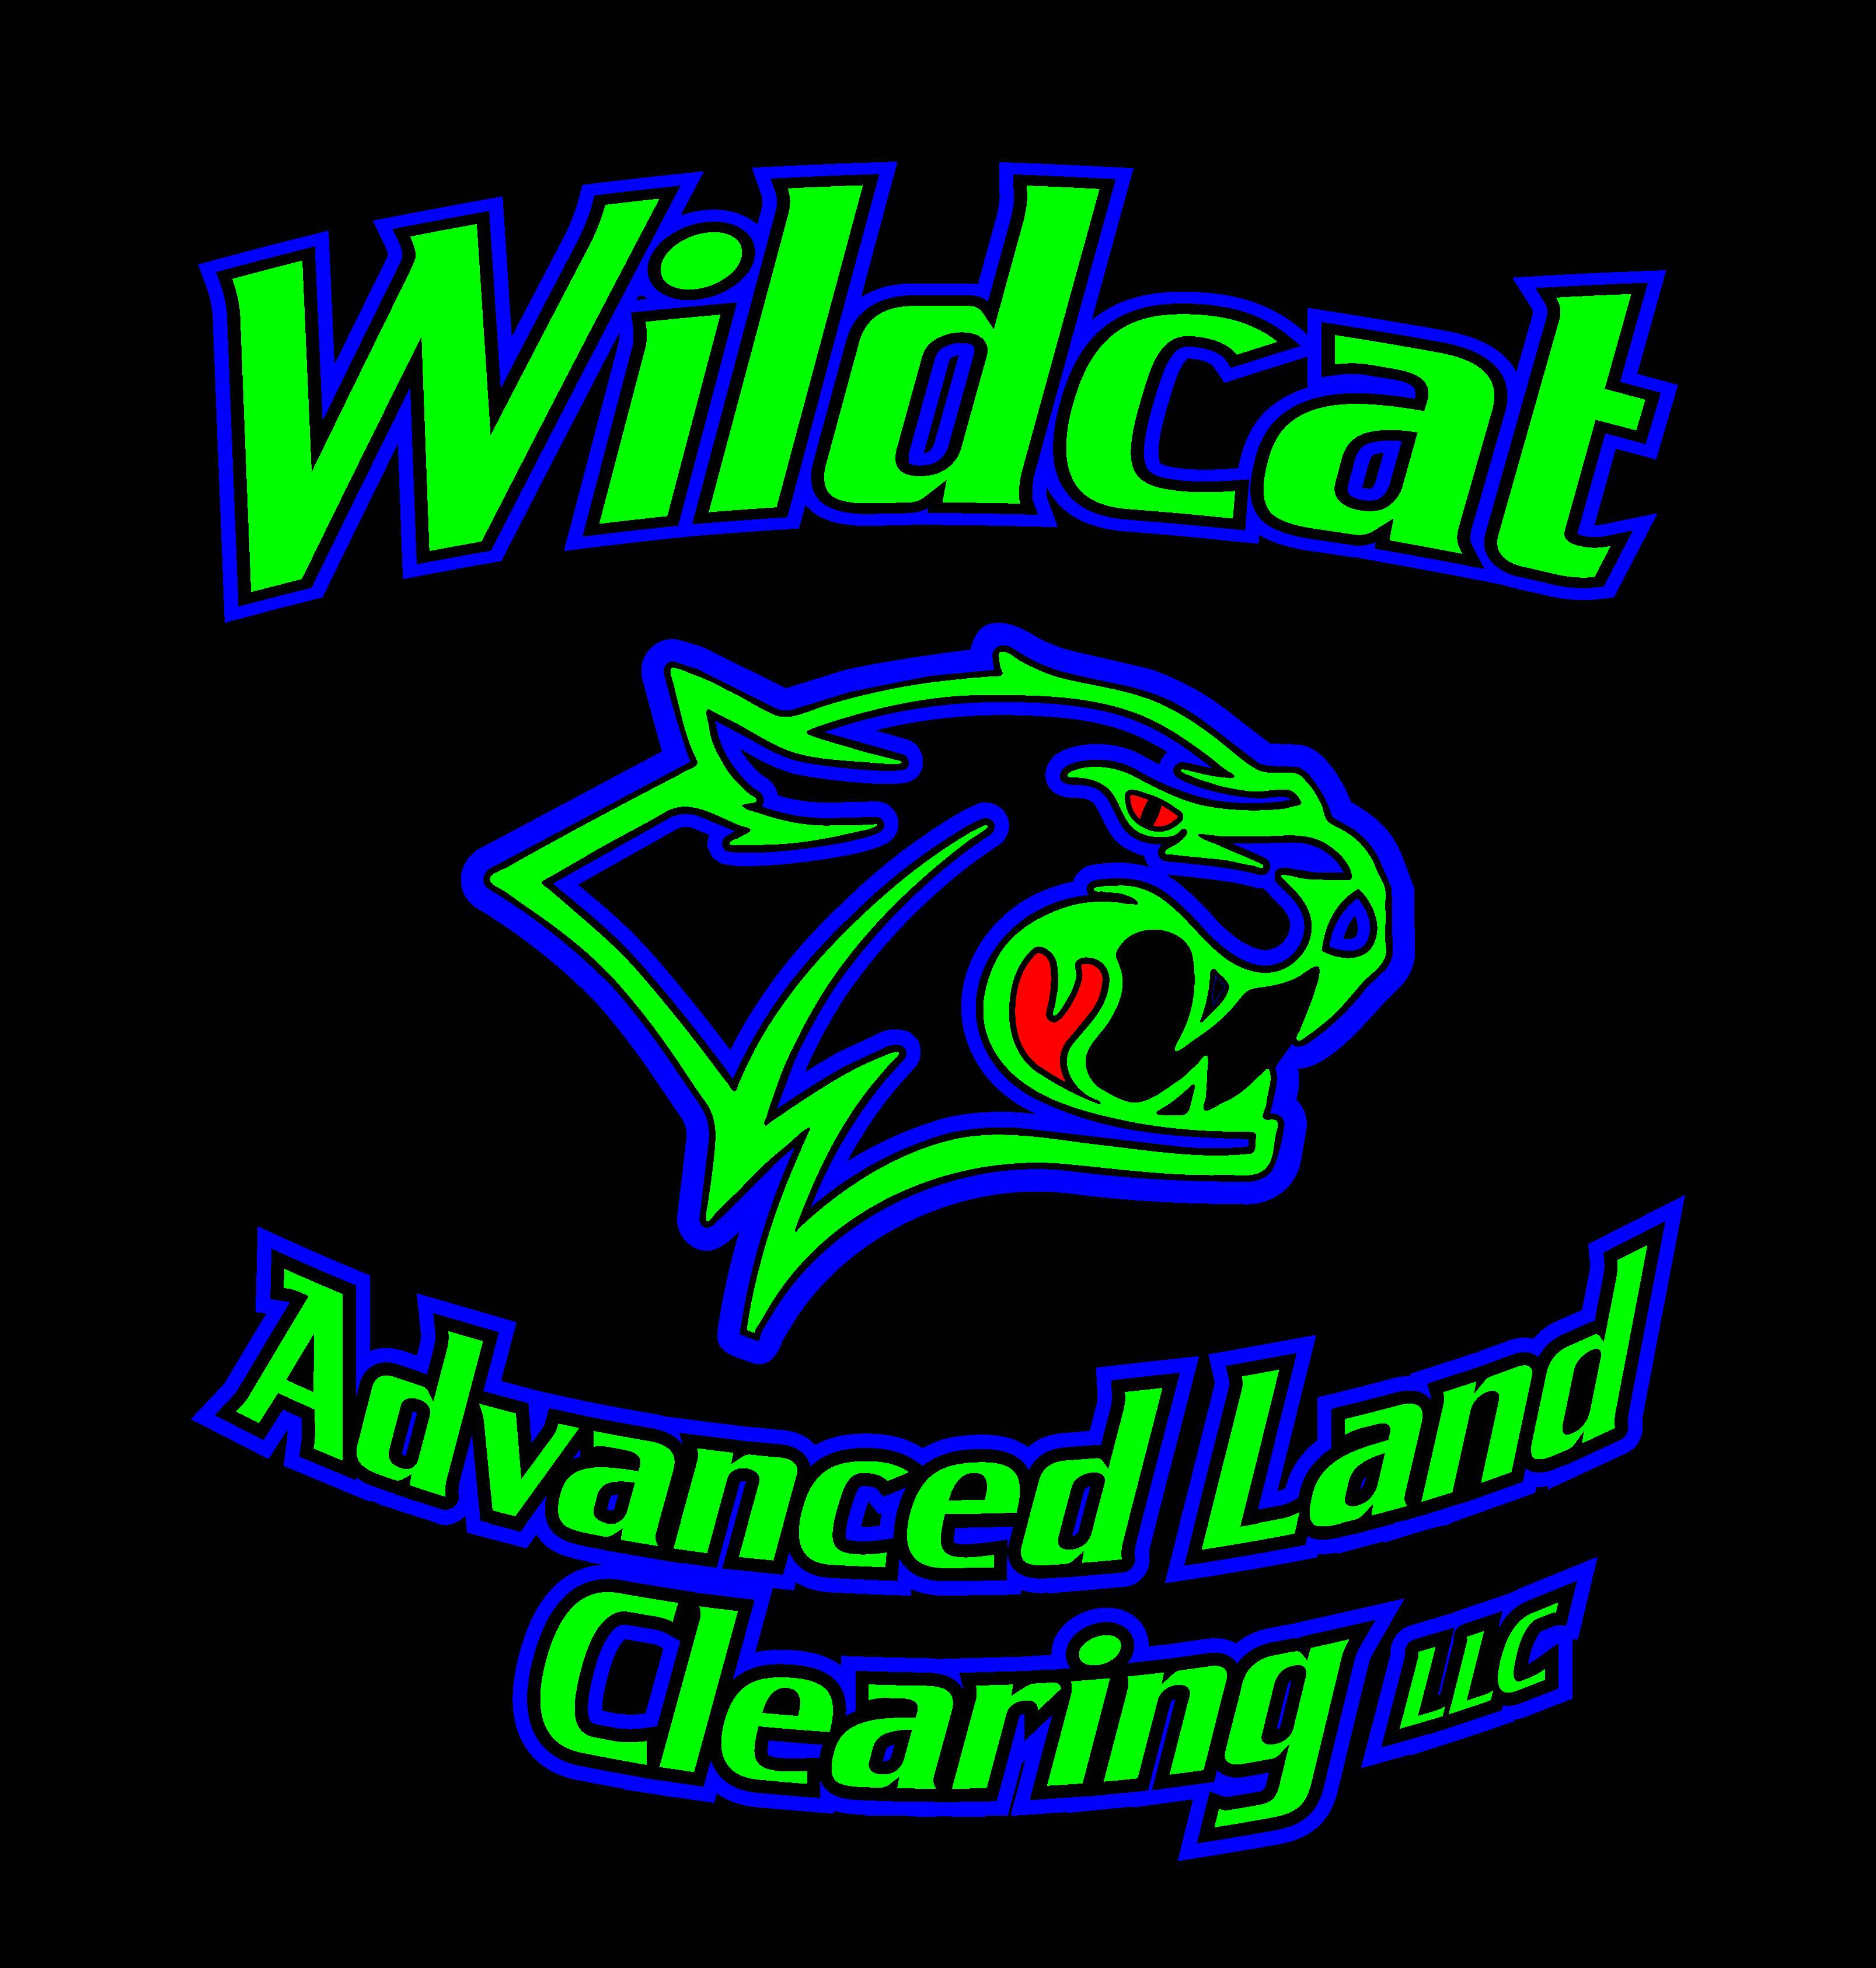 Wildcat Advanced Land Clearing Logo